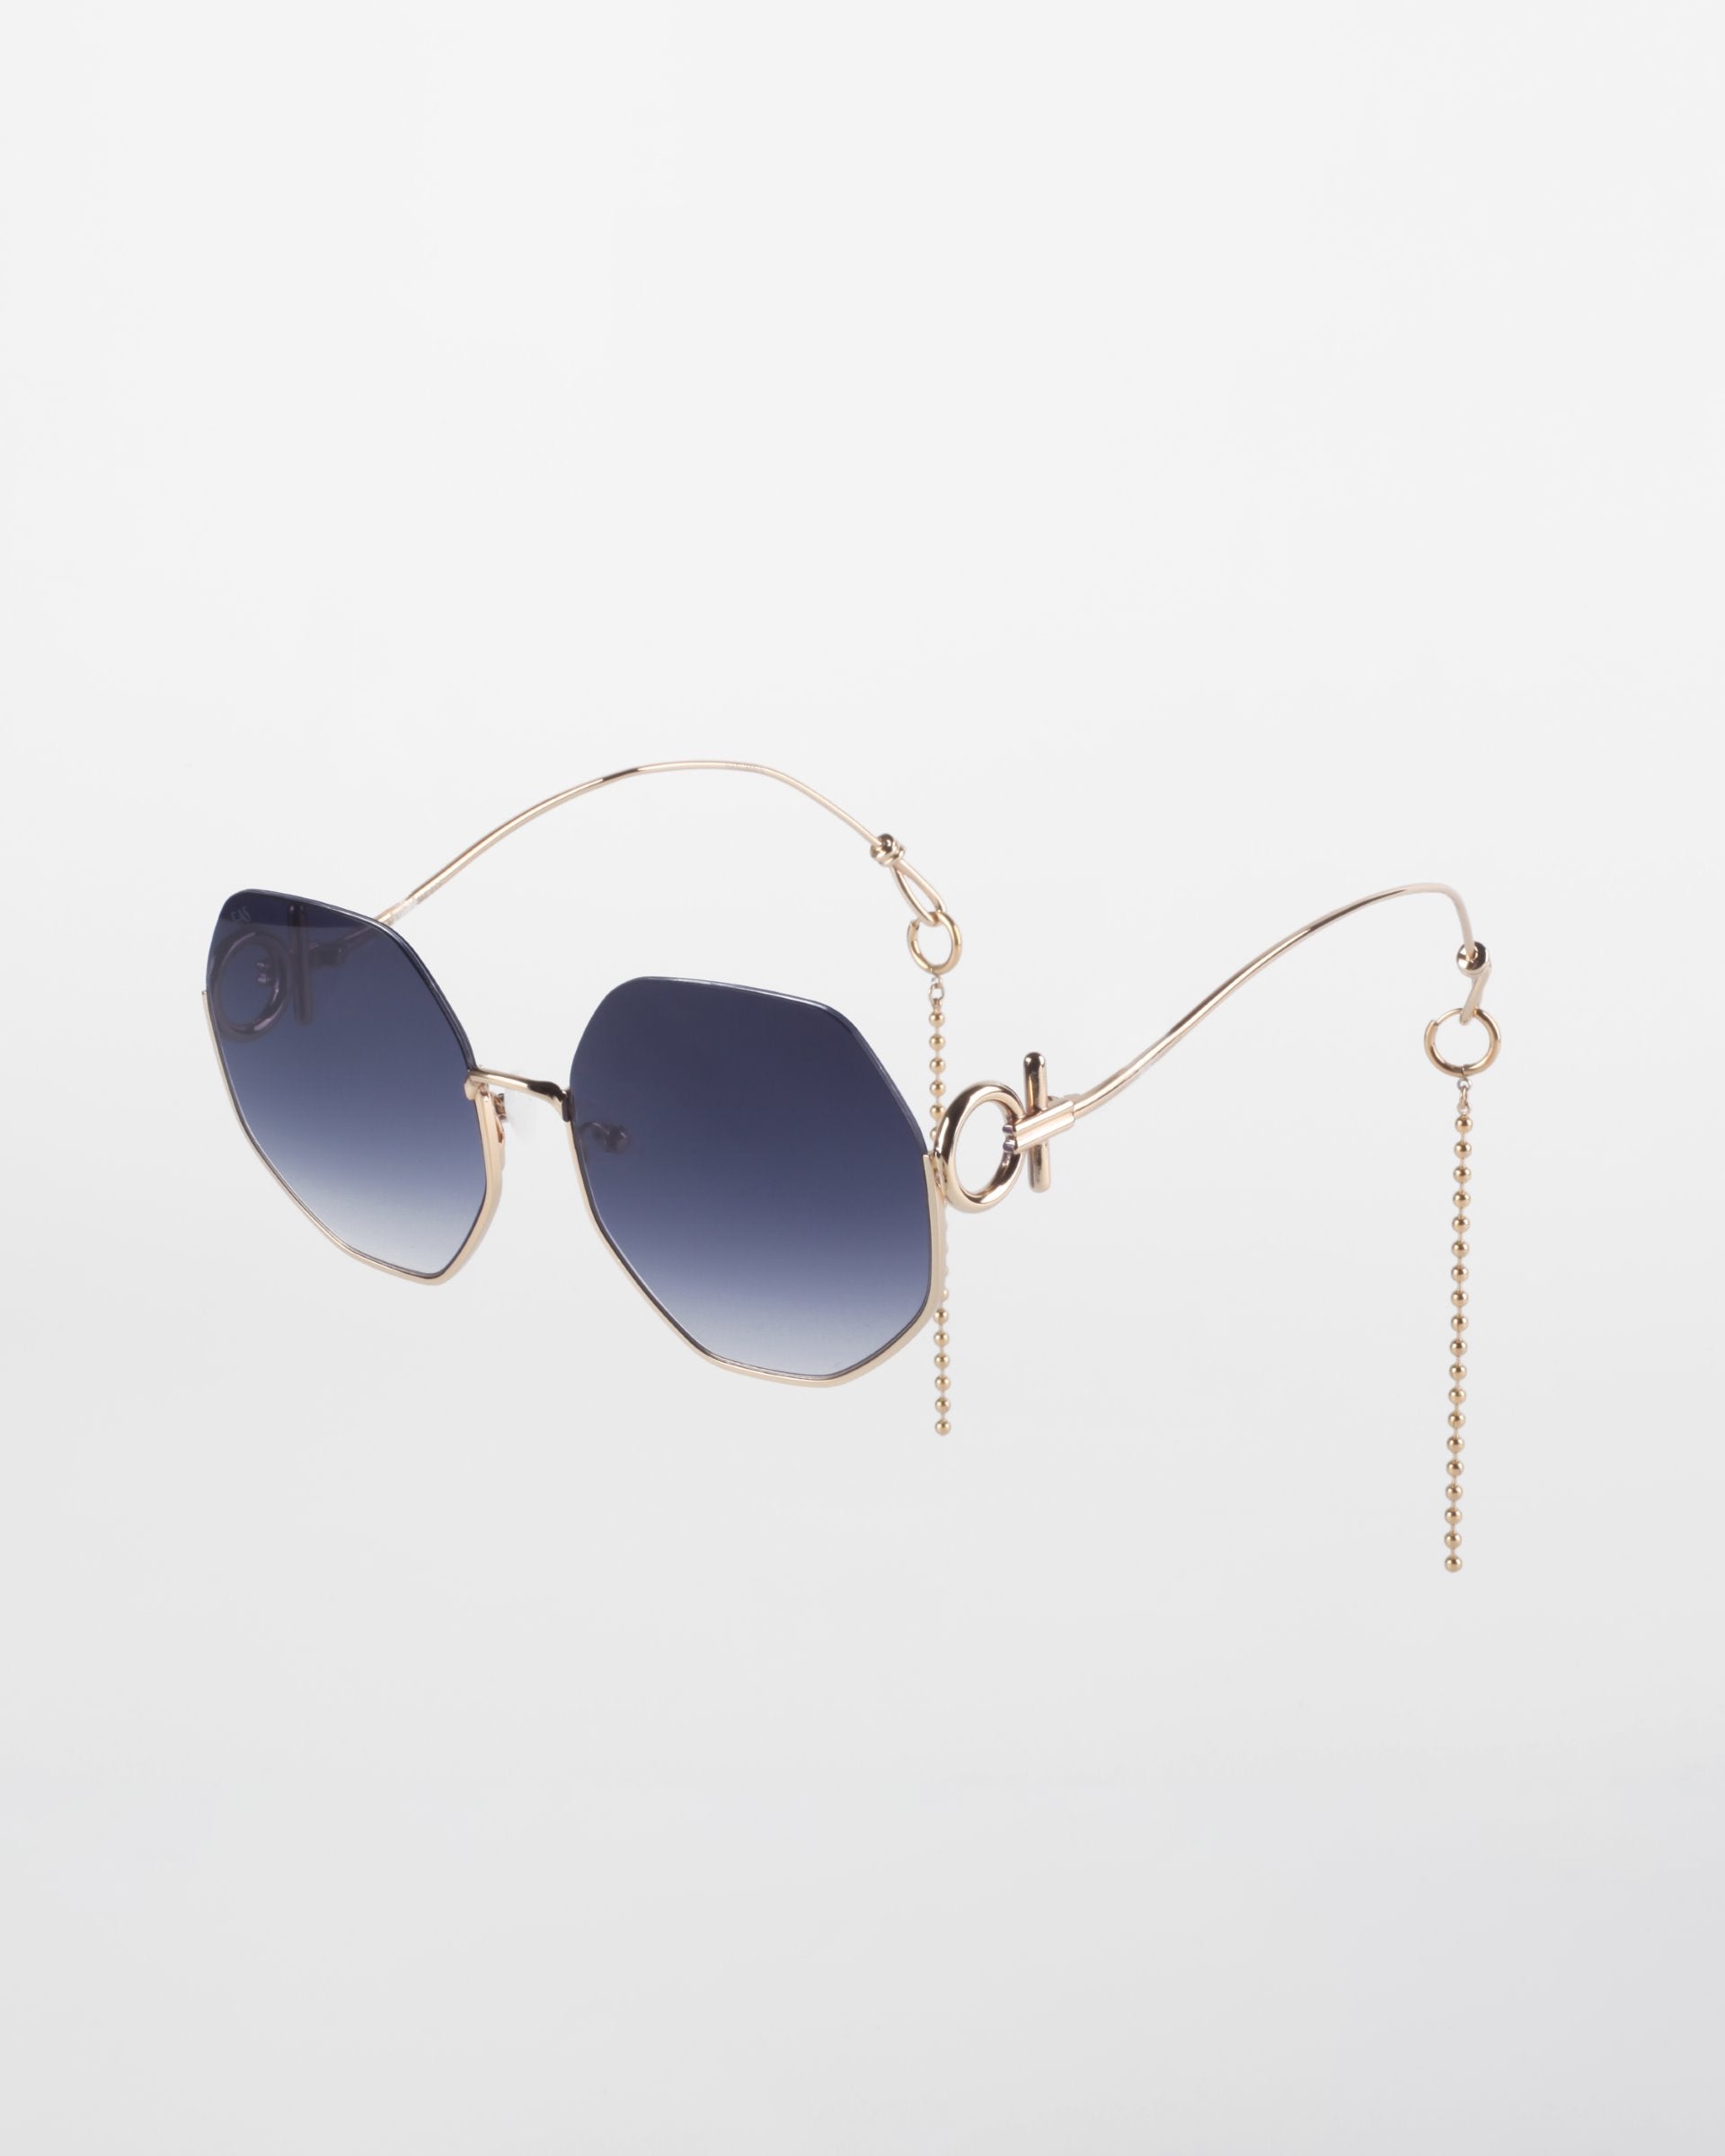 Stylish sunglasses with octagonal, gradient lenses and 18-karat gold-plated frames featuring unique, curved temples and chain accents on a plain white background. Limited Edition Palace by For Art&#39;s Sake®.